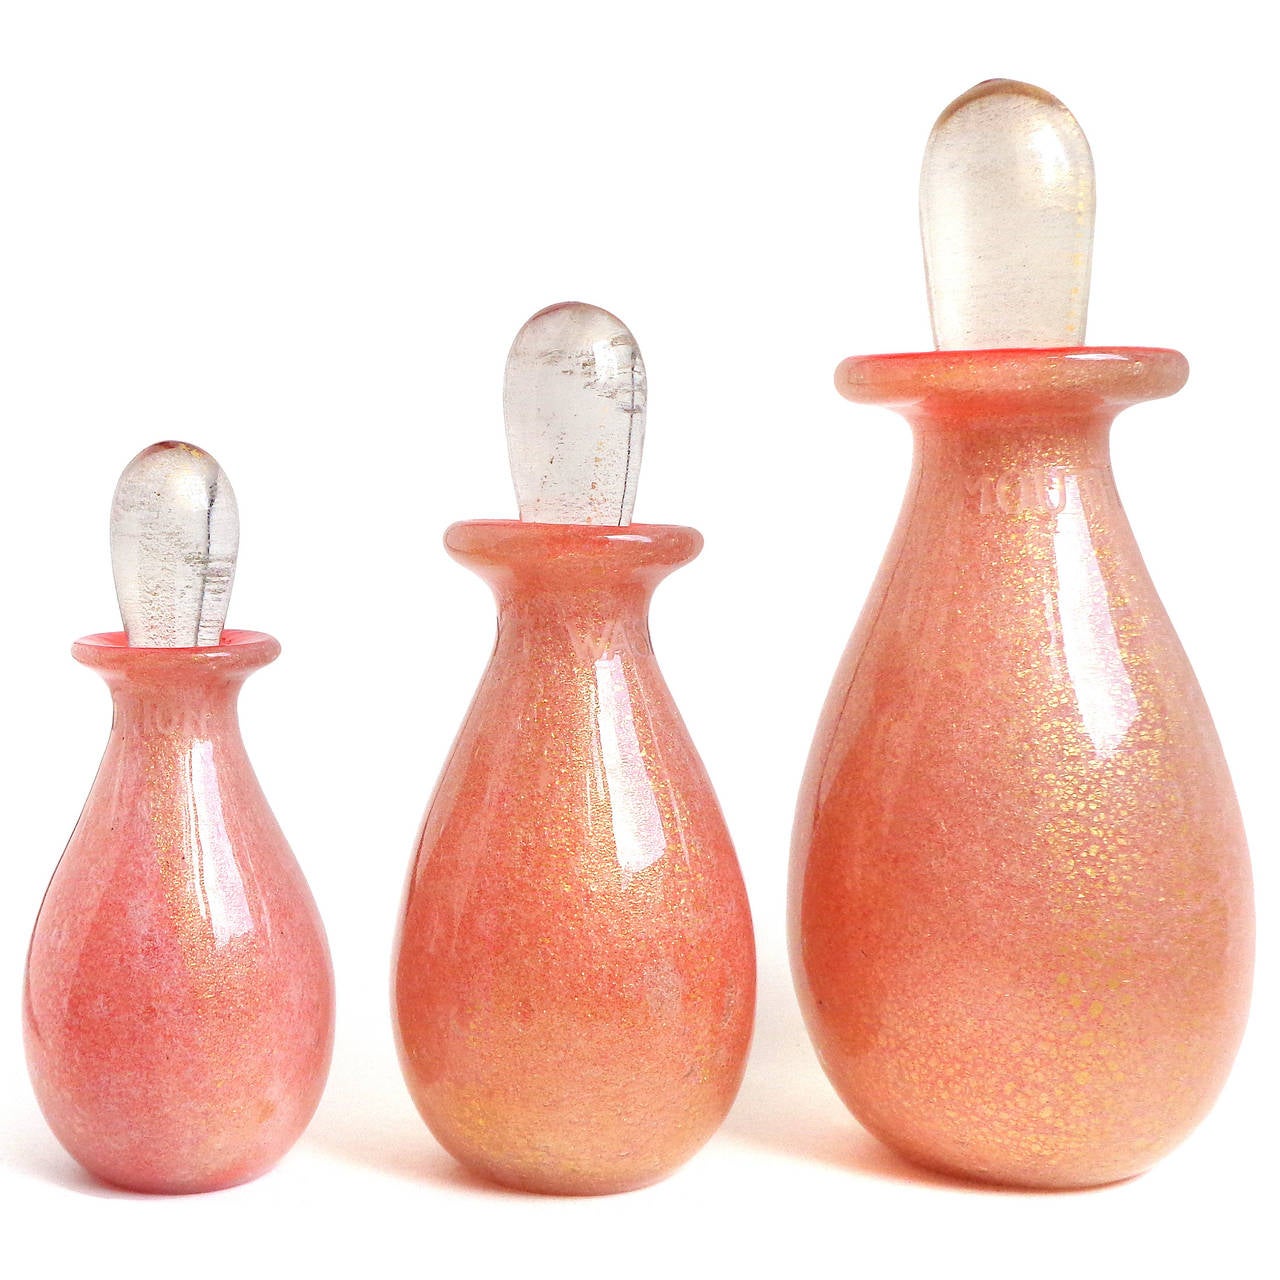 Incredible Murano hand blown container and stoppered bottles, in coral orange and gold leaf Italian art glass bathroom / vanity set. Attributed to the Seguso Vetri D' Arte company, circa 1930s-1940s. Created in the 